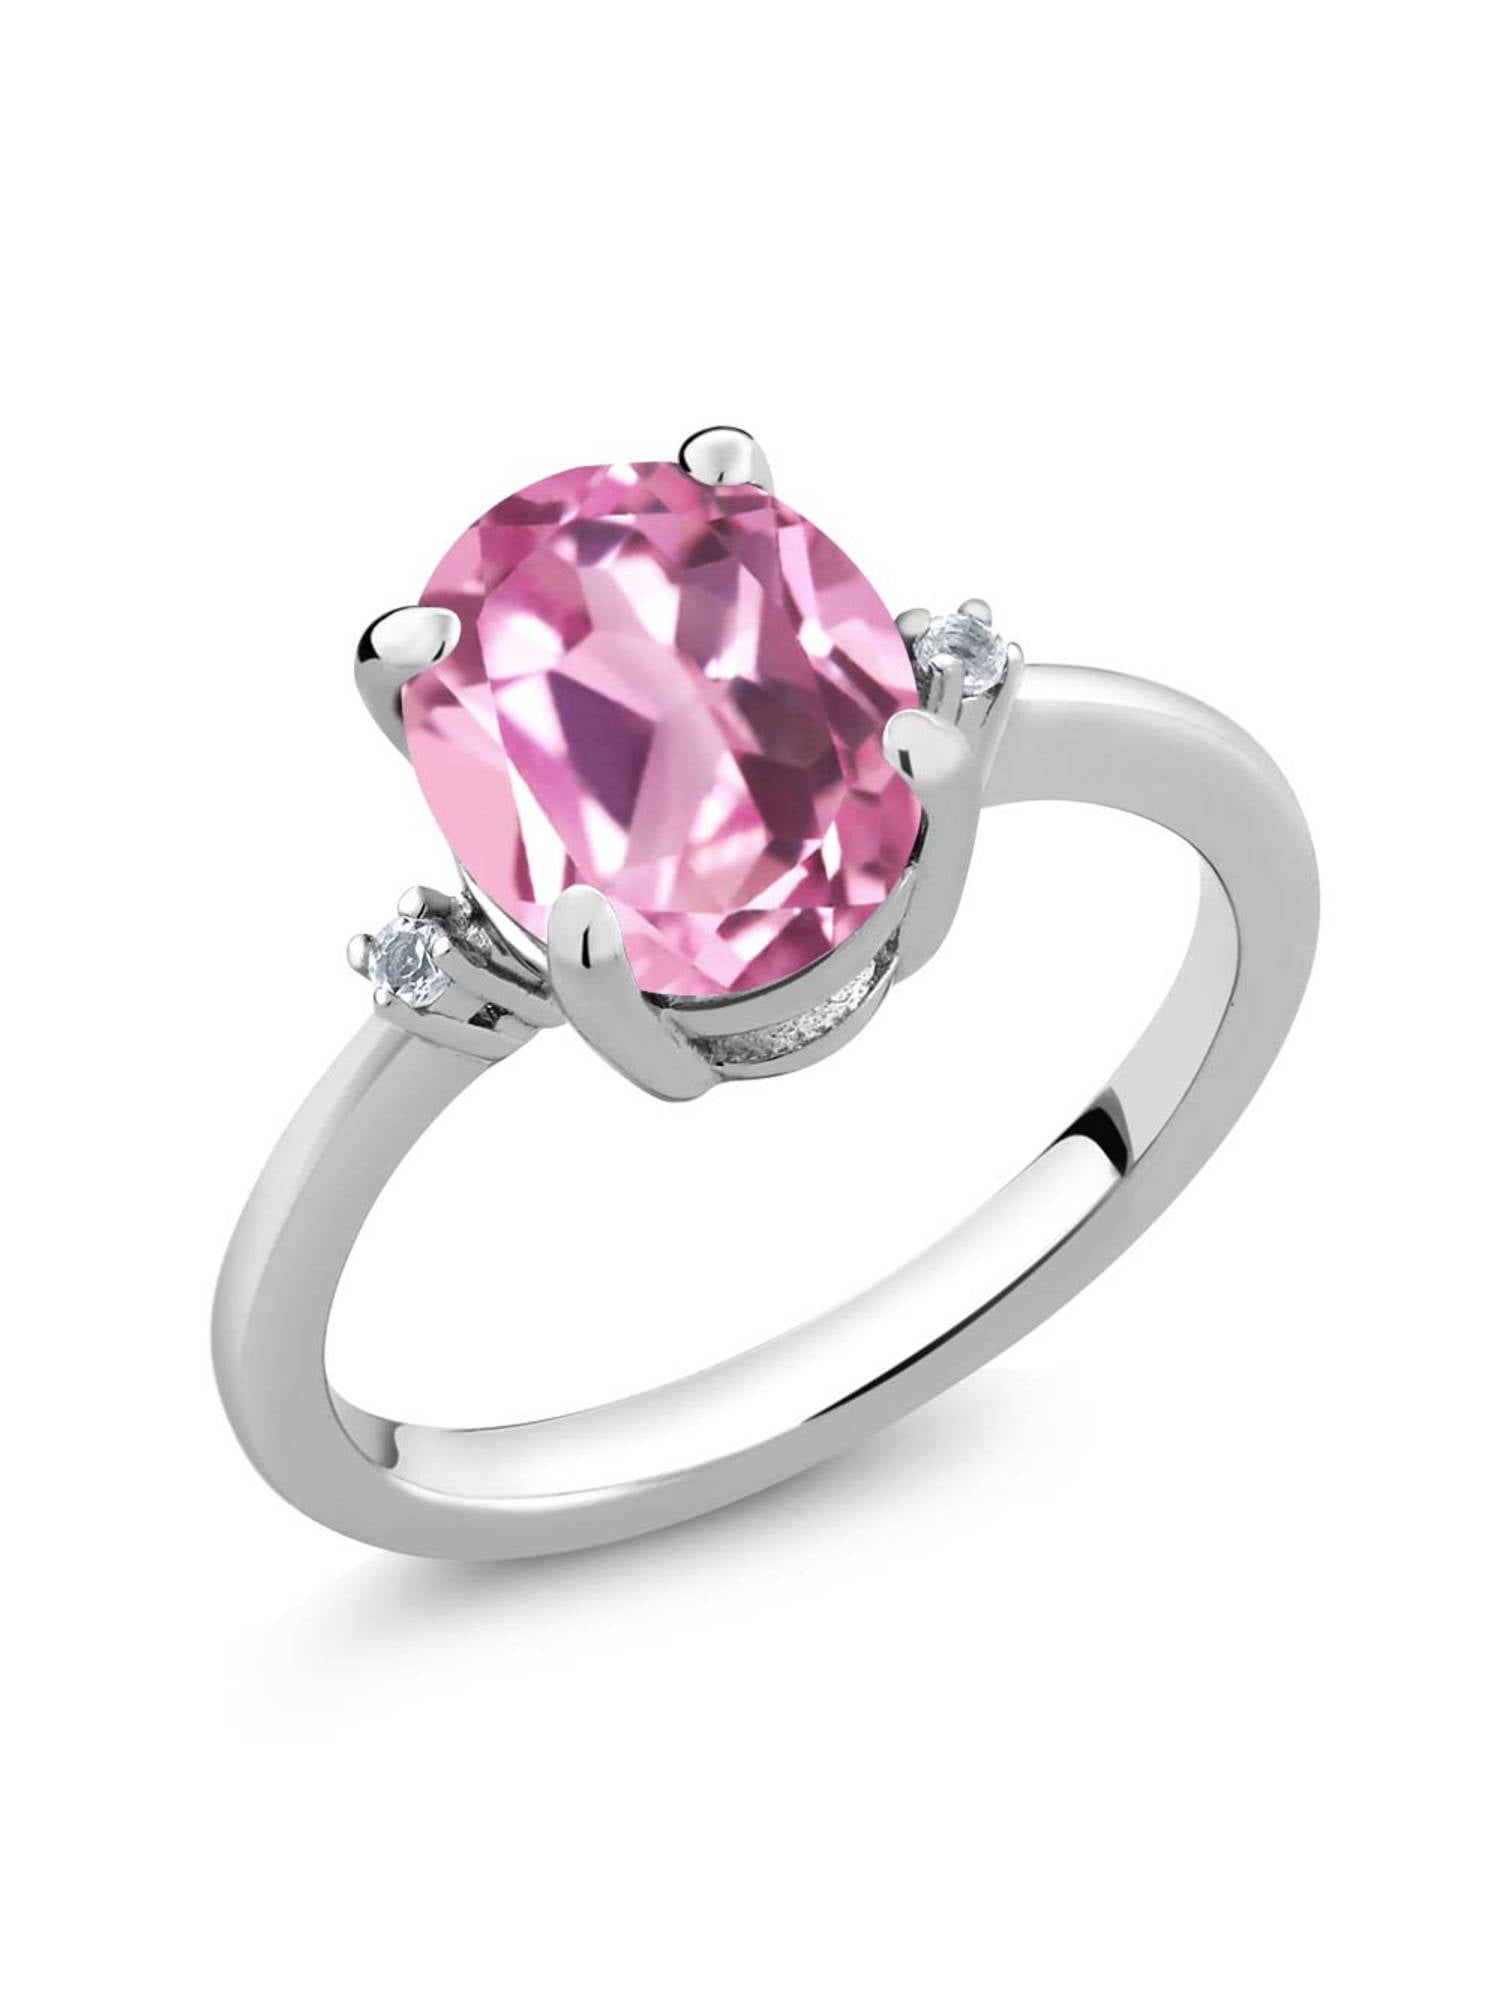 Gem Stone King 1.04 Ct Pink Created Sapphire White Created Sapphire 925 Sterling Silver Ring 